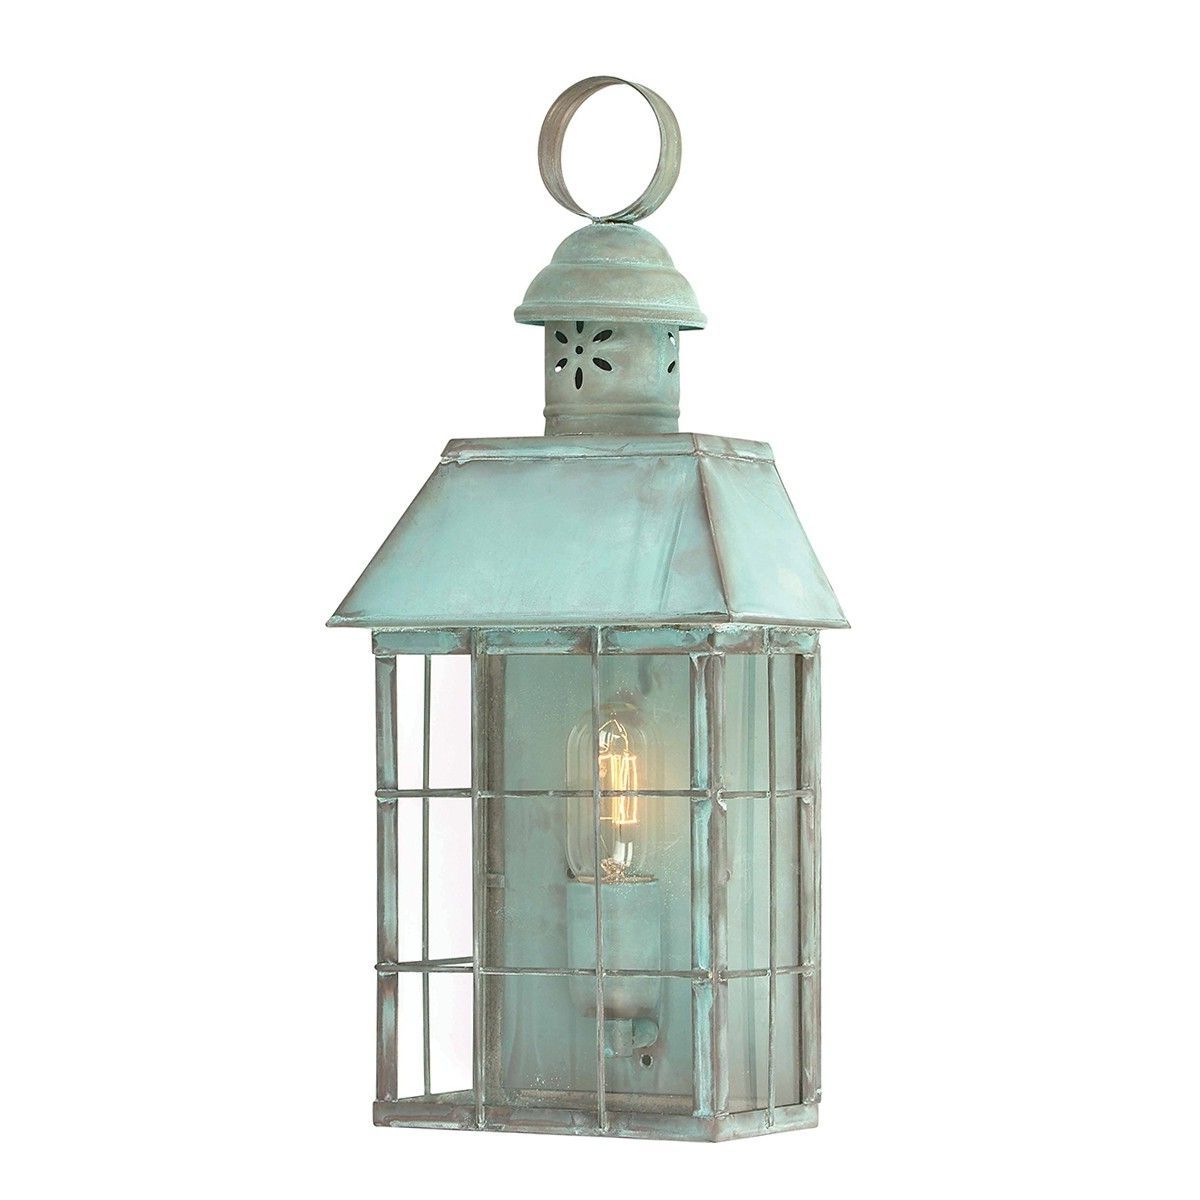 Georgian Style Outdoor Lighting Intended For Current Elstead Lighting Hyde Park Wall Light Outdoor Lantern Verdi Hyde (View 14 of 20)